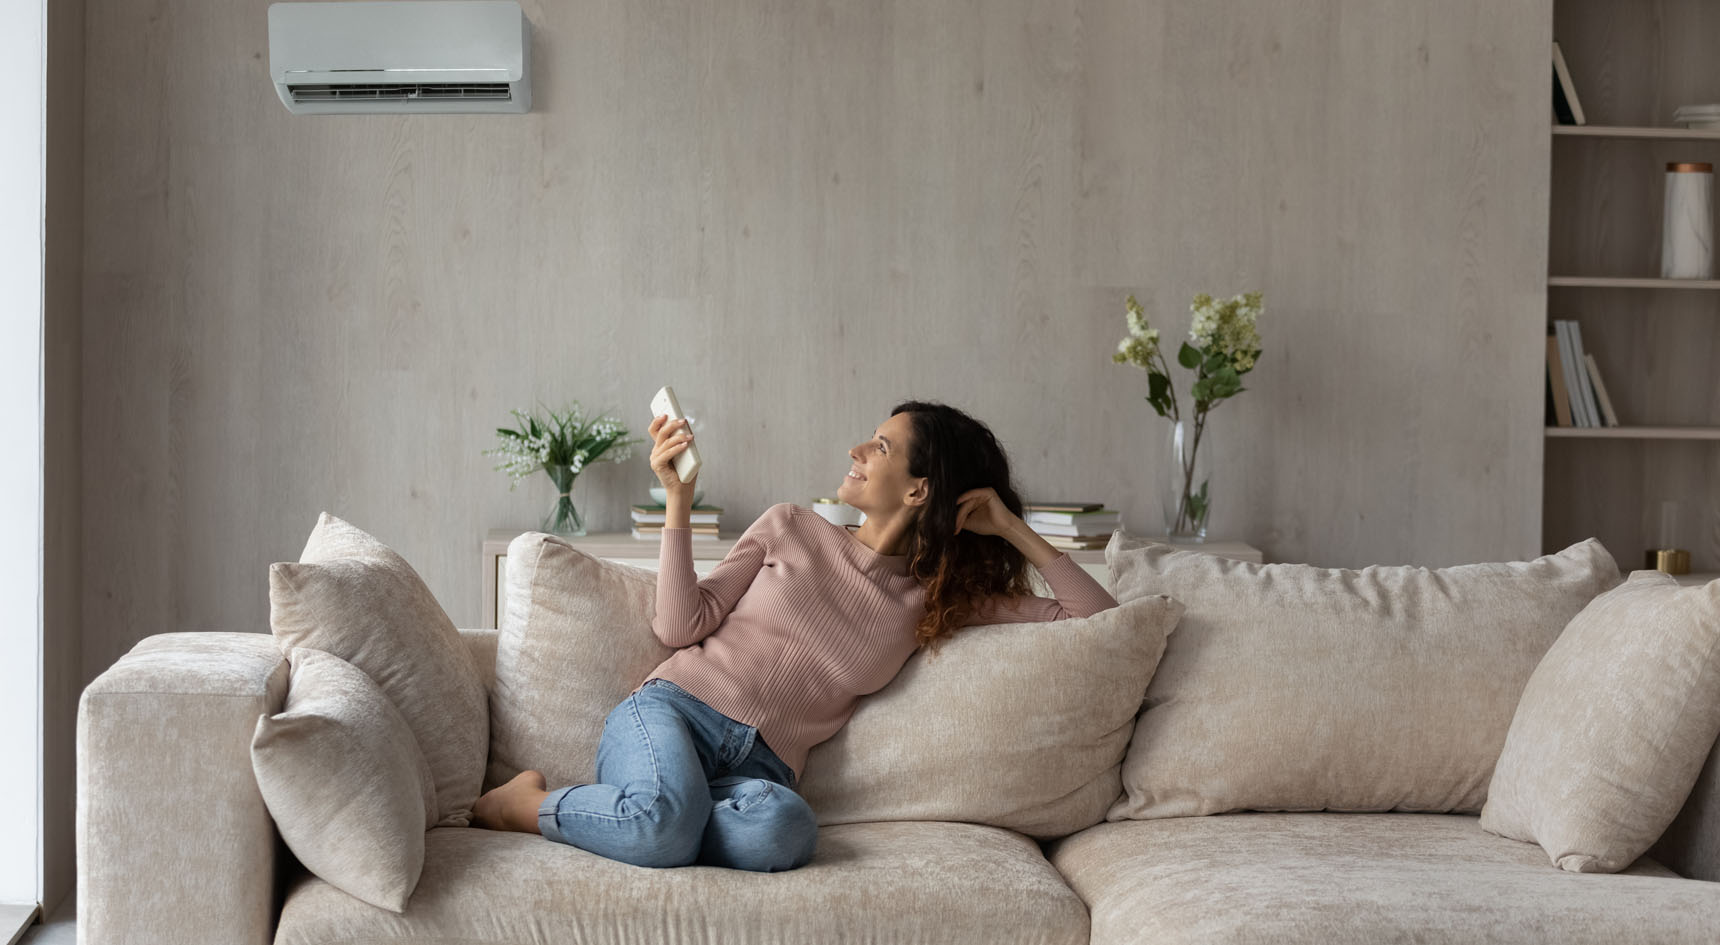 A lady sitting on a couch turning on her air-conditioning